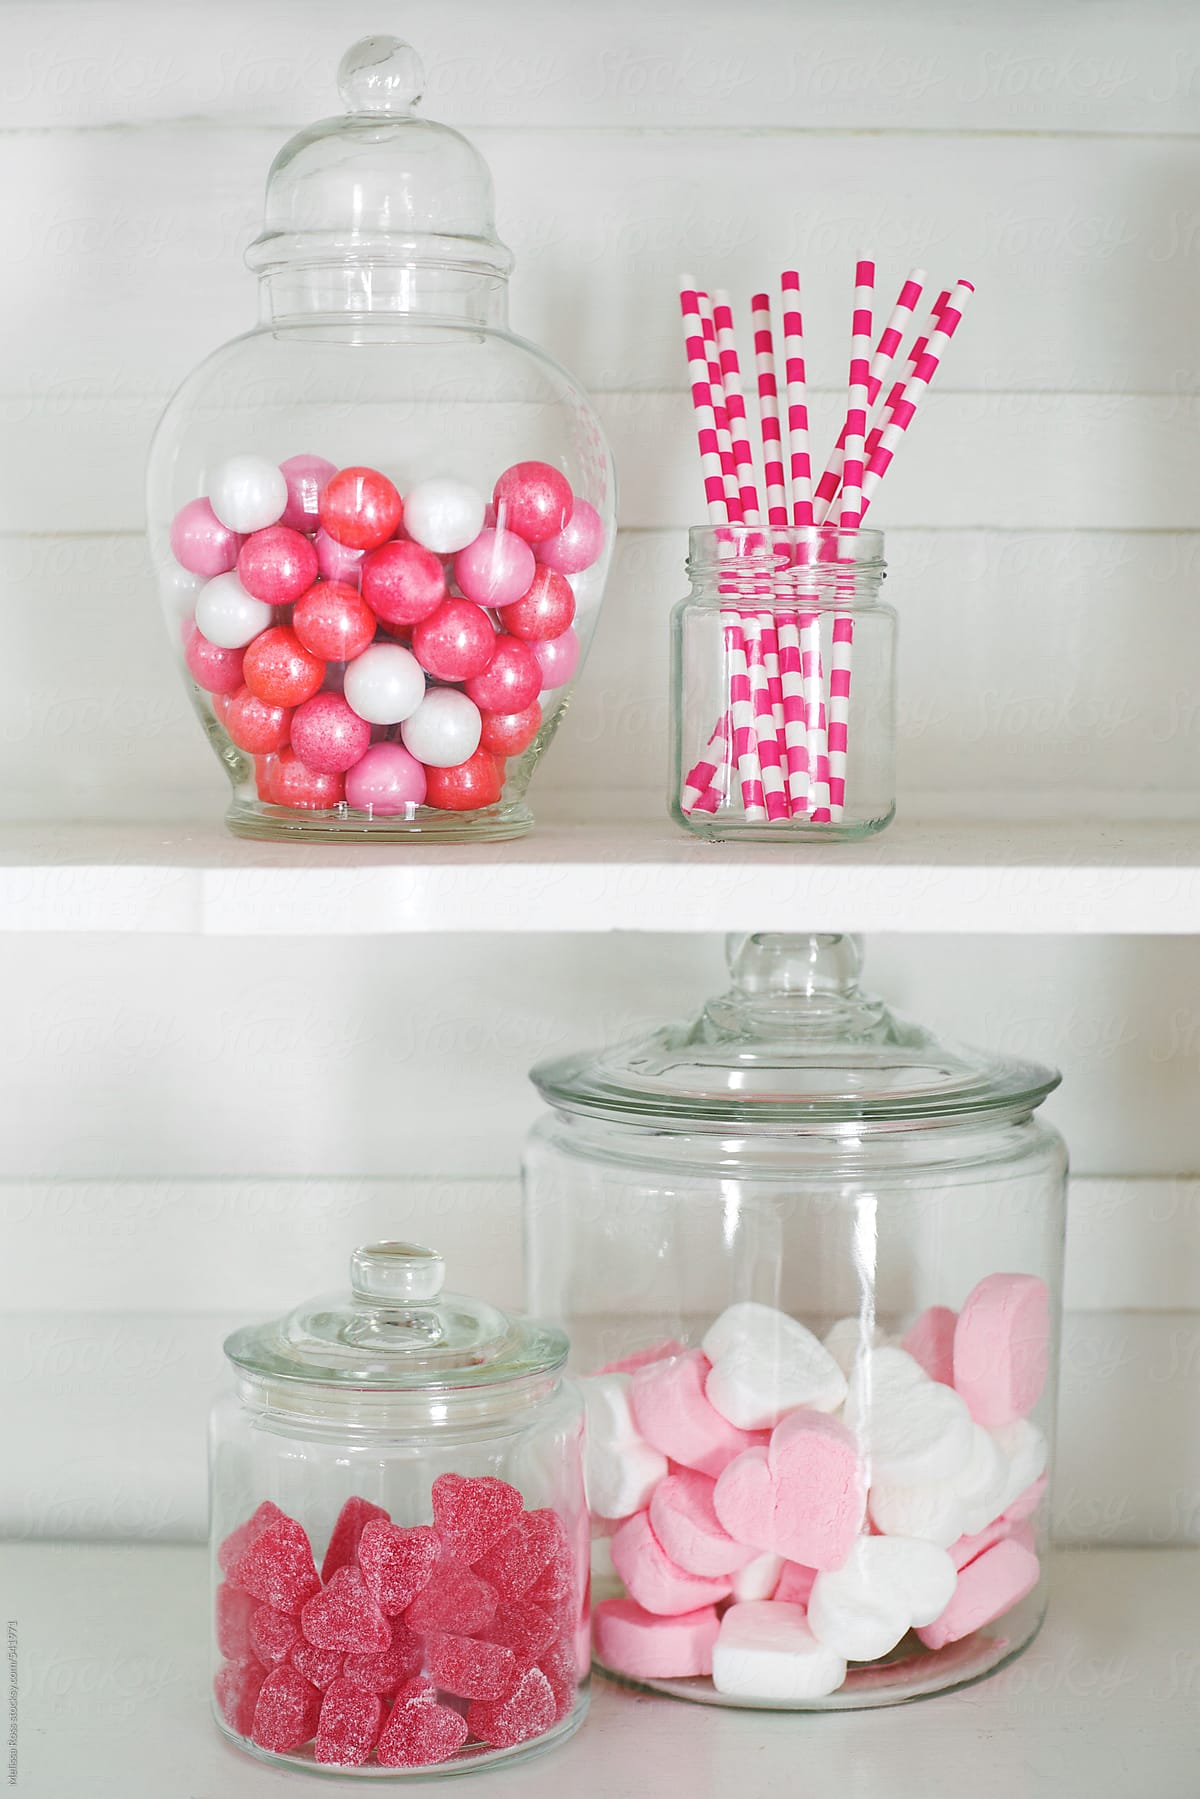 Confectionery in Jars